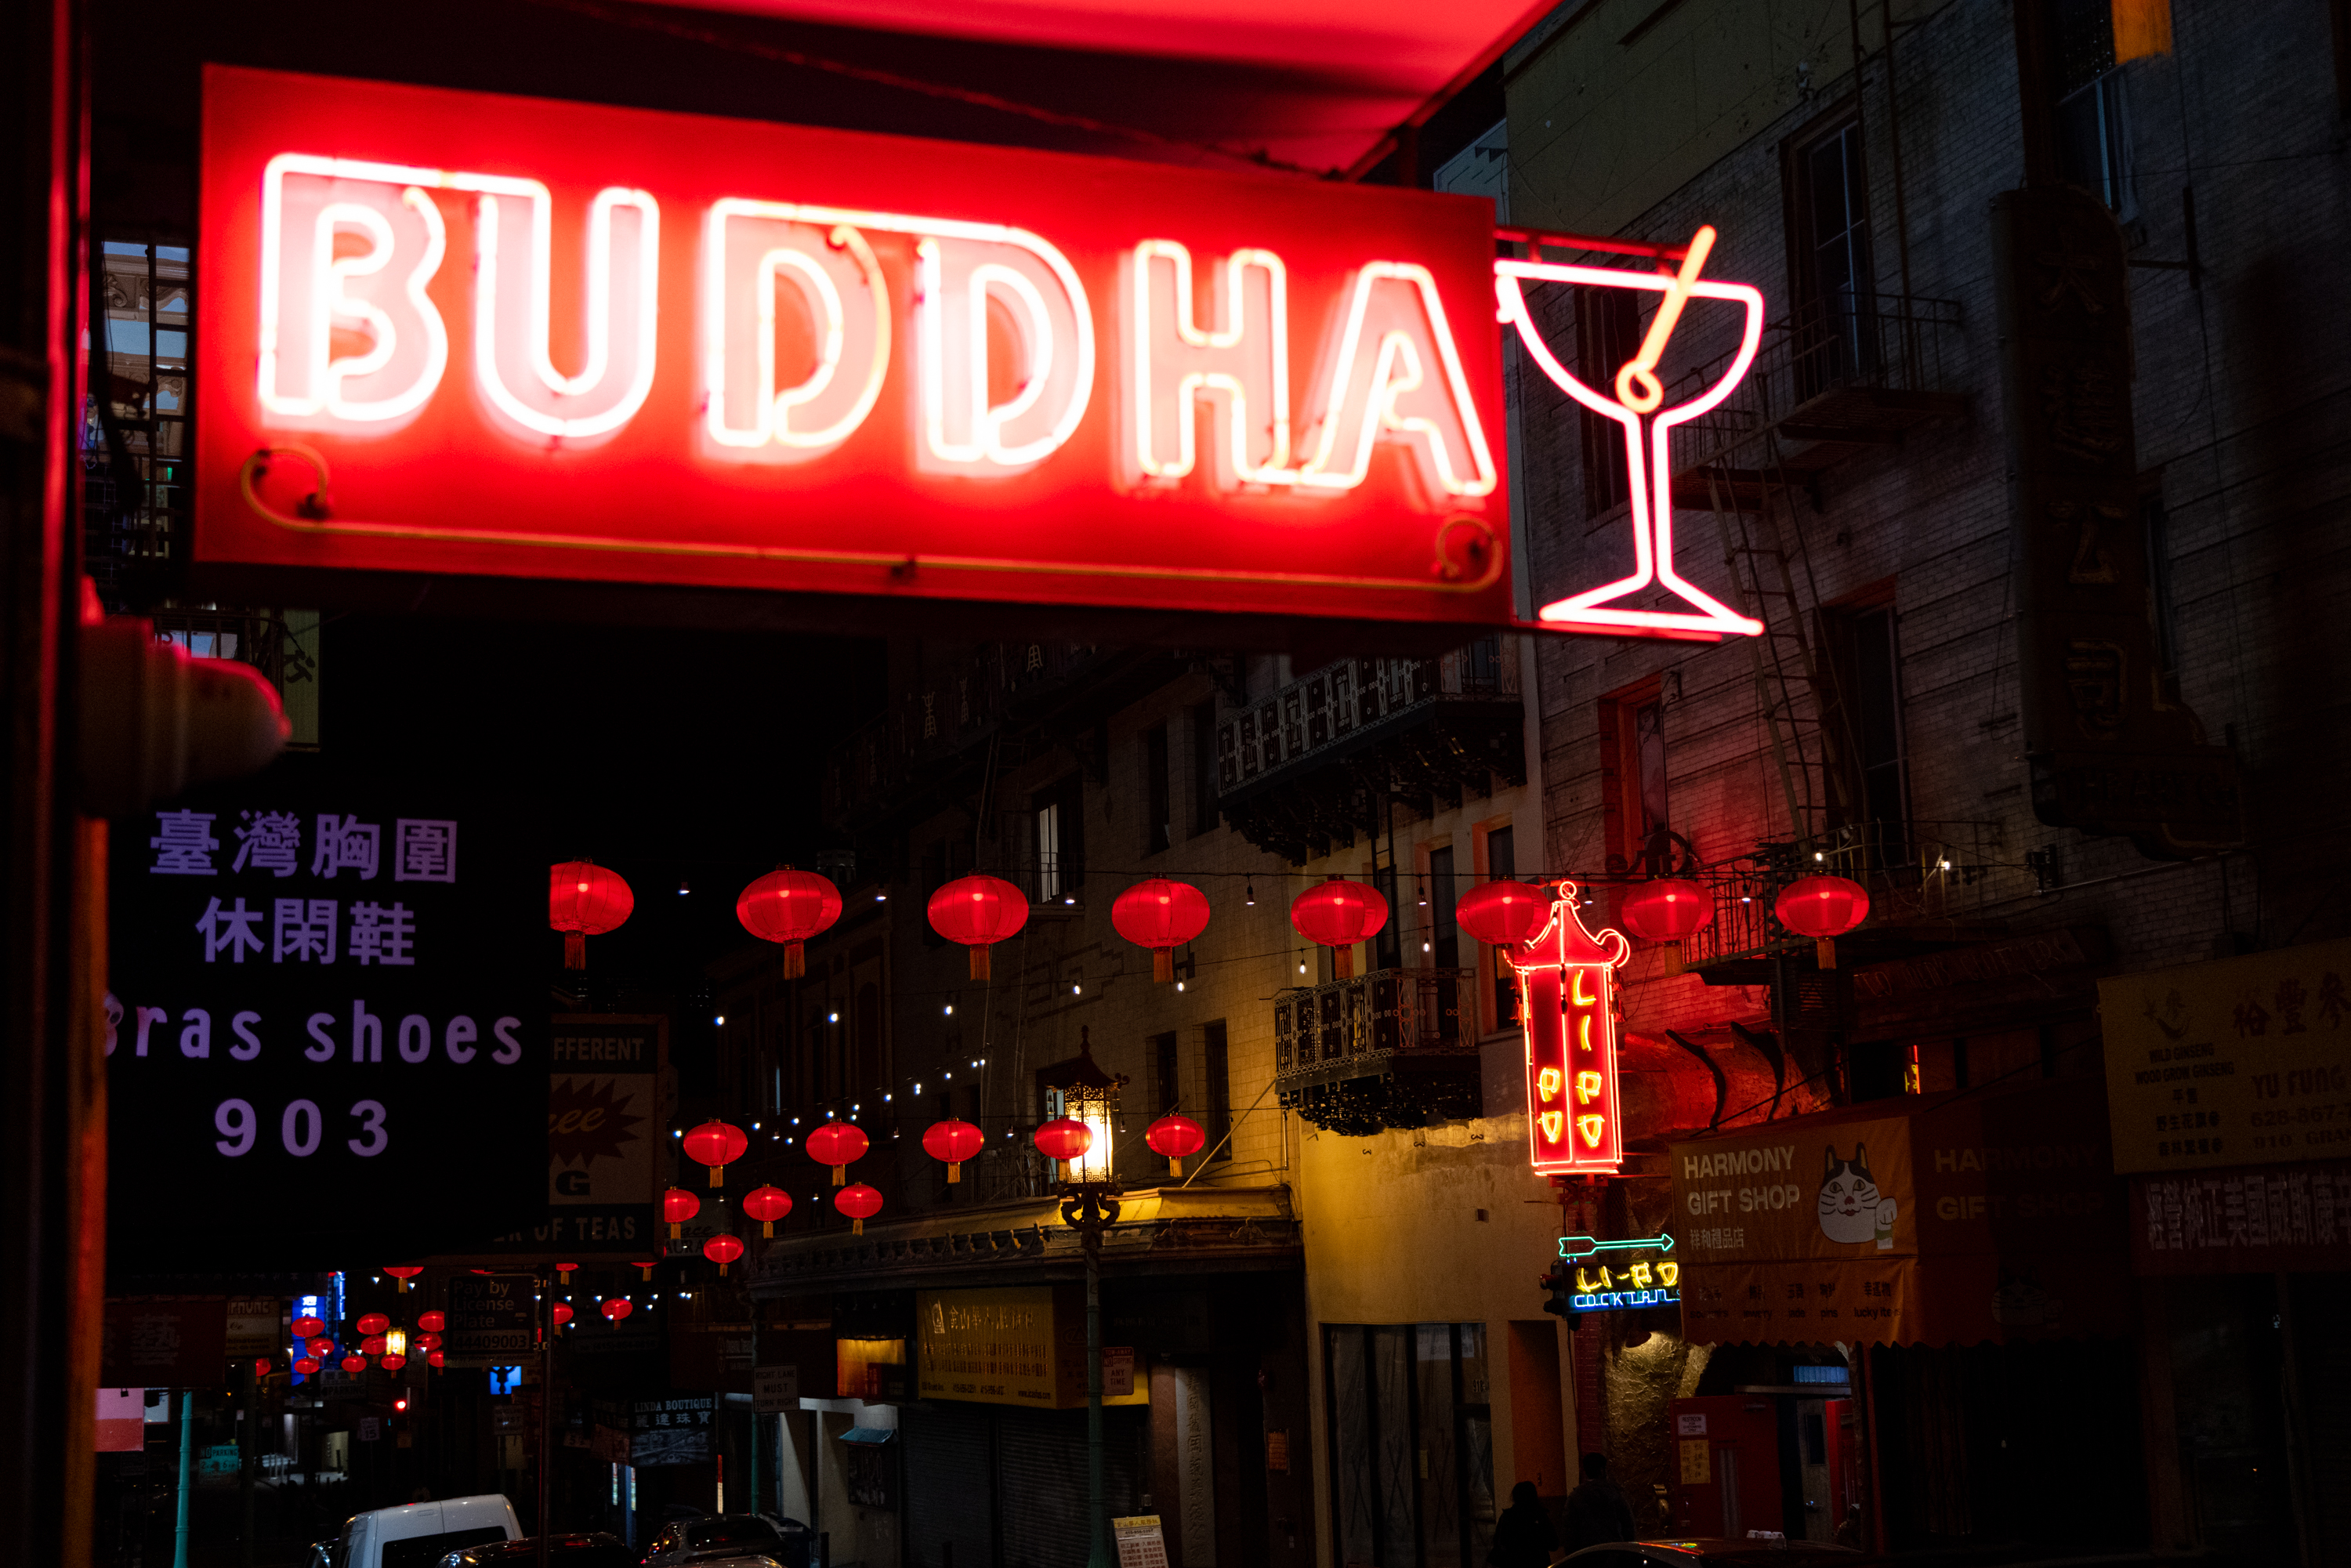 A red neon sign at night that reads &quot;BUDDHA&quot;